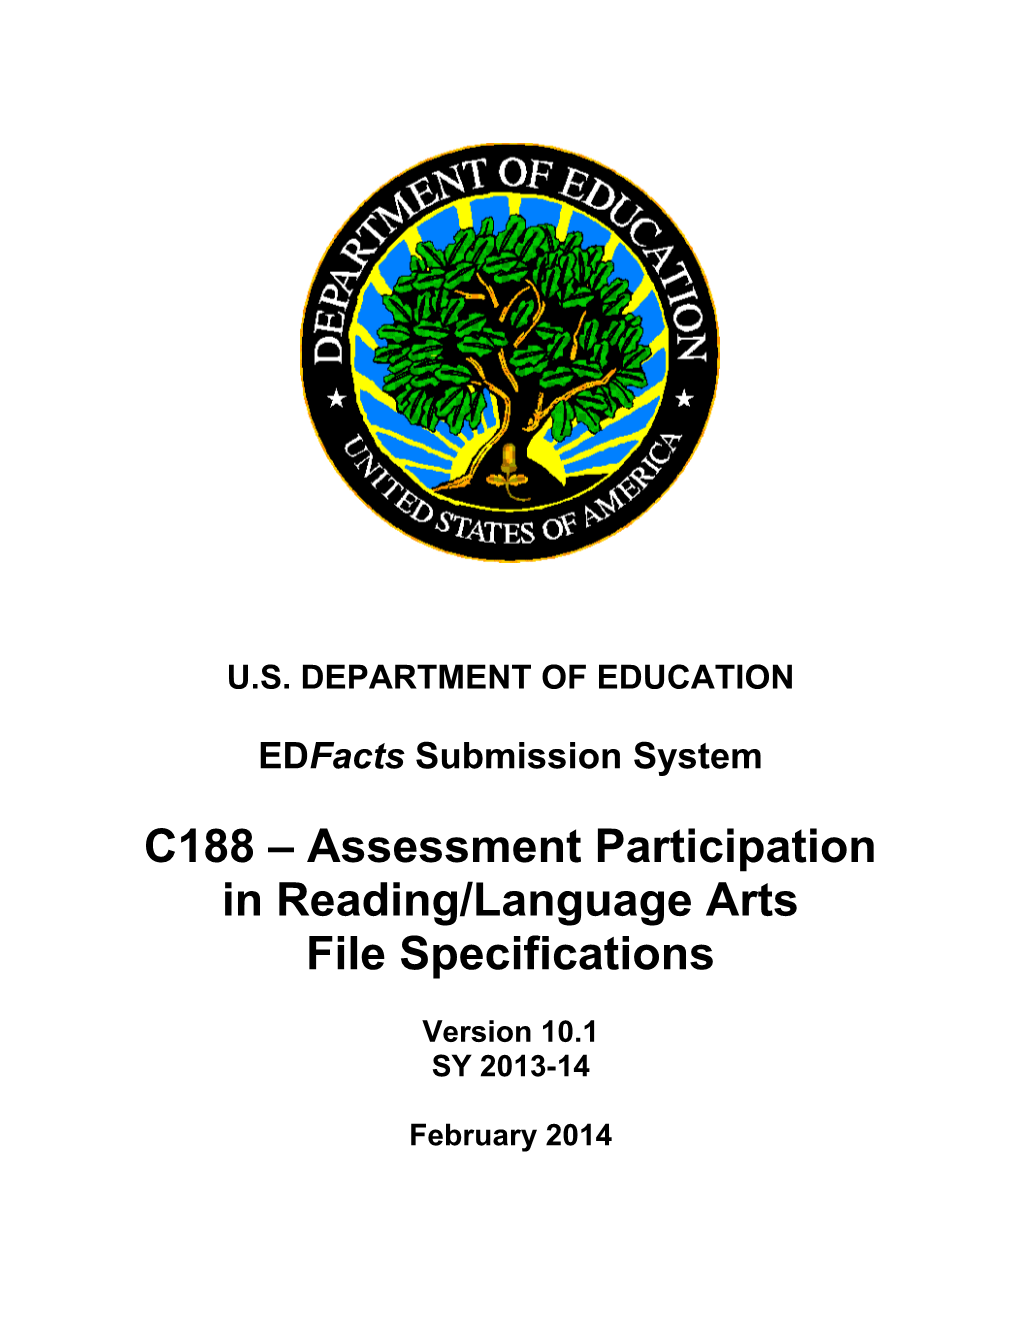 Assessment Participation in Reading/Language Arts File Specifications